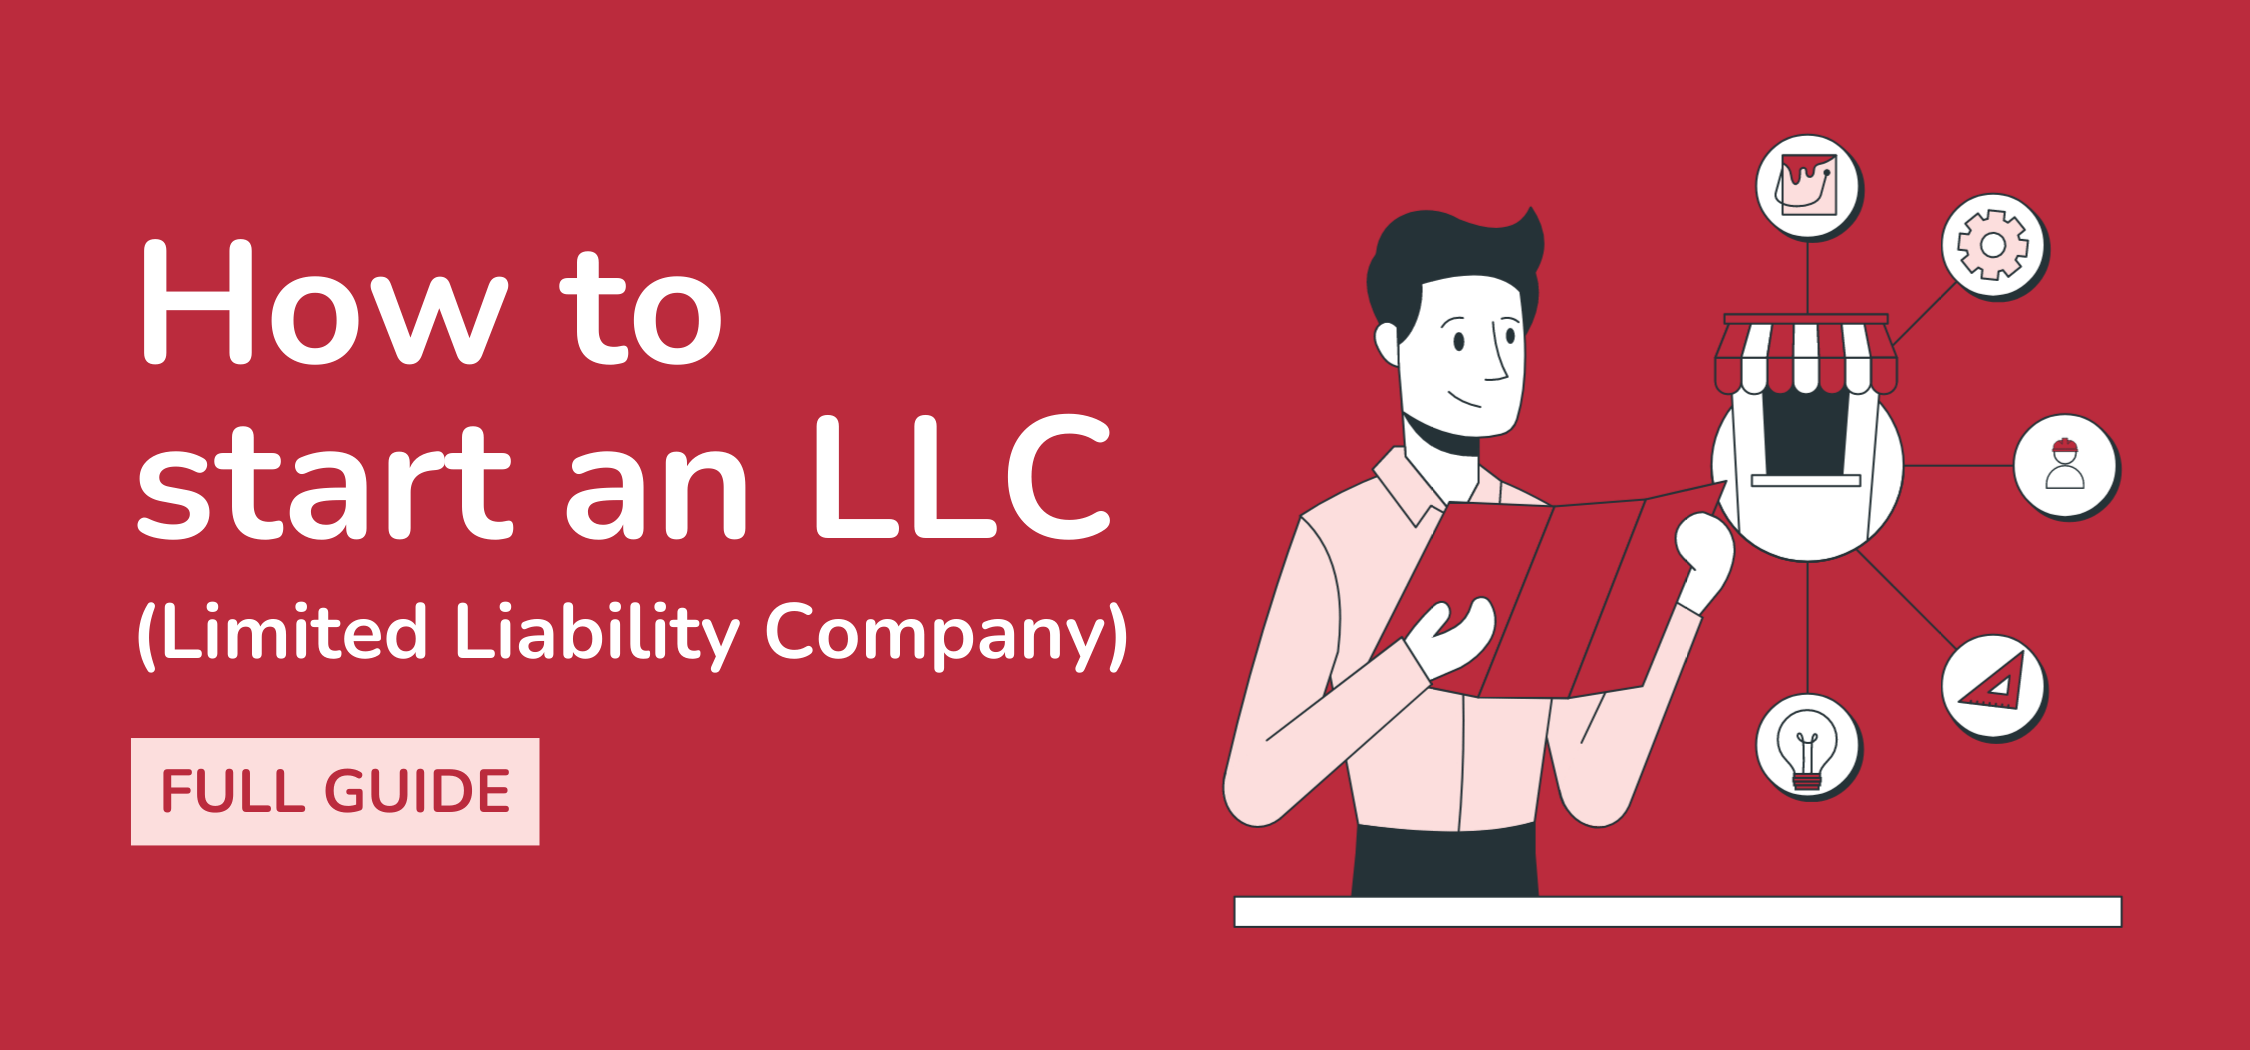 How to Start an LLC (Limited Liability Company) | Full Guide